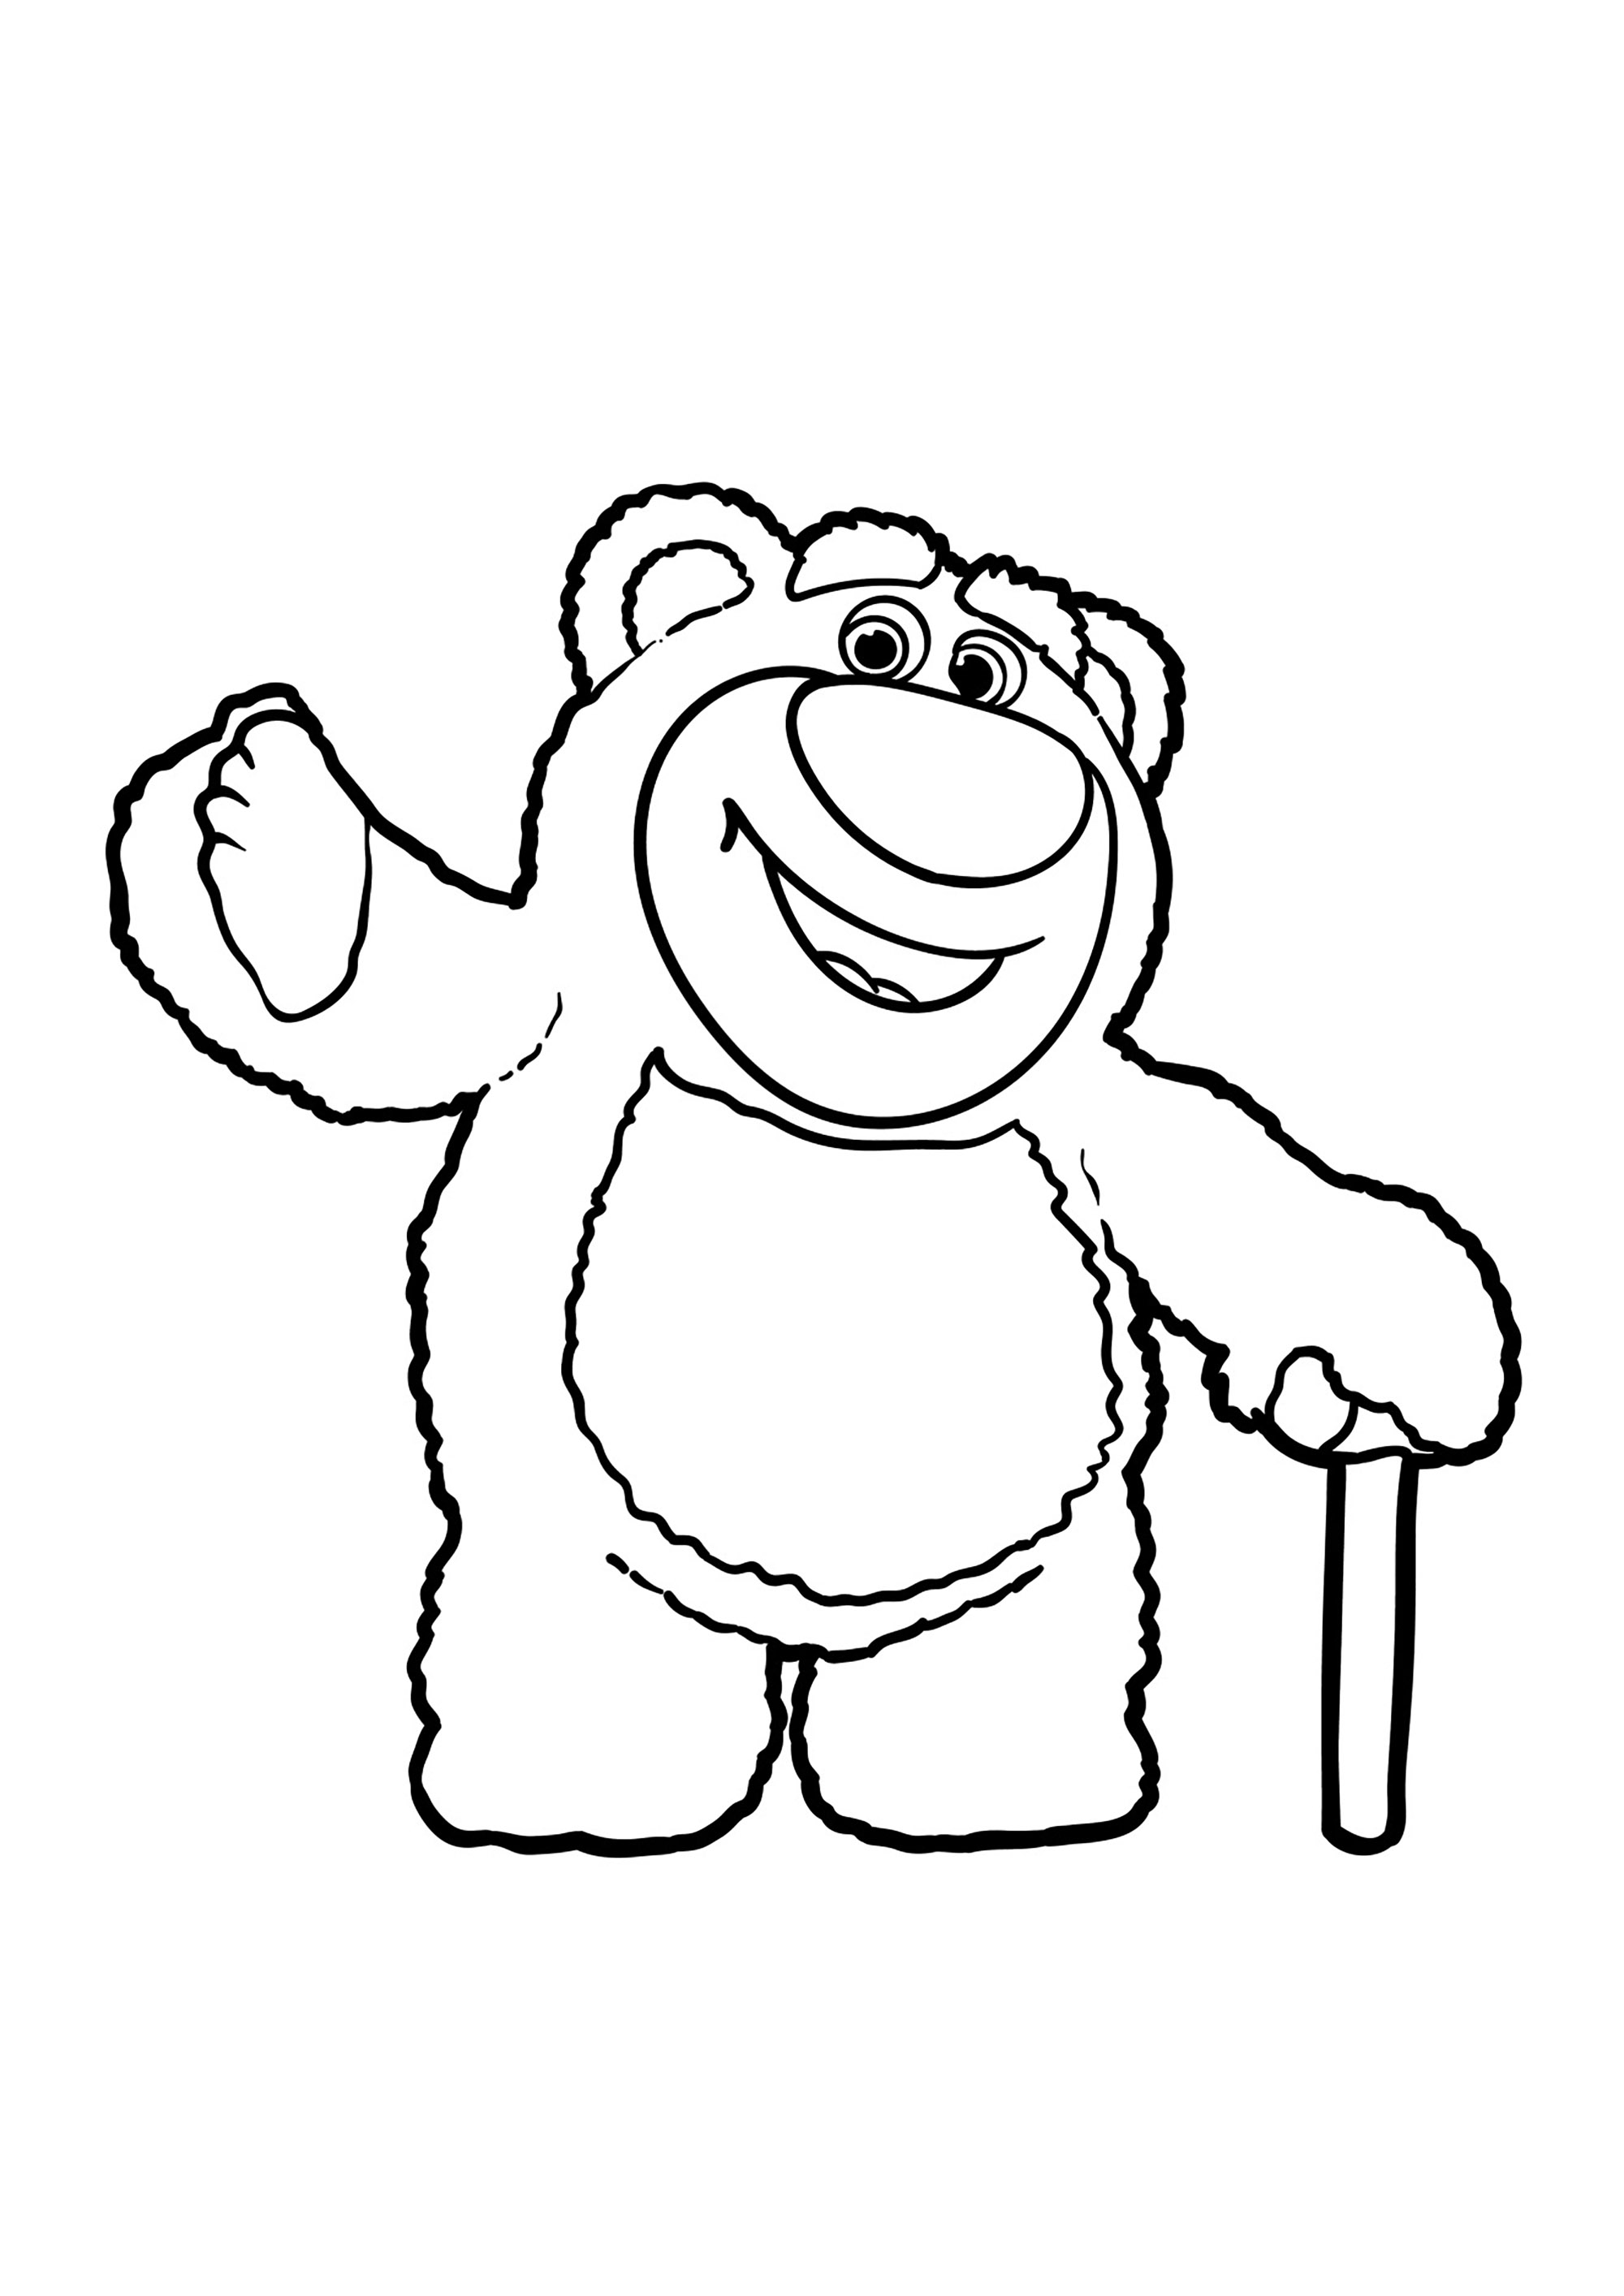 Lotso, the evil pink bear from Toy Story 3. Feel free to add extra details to the bear, such as stripes, spots or patterns, to give your creation a personal touch.